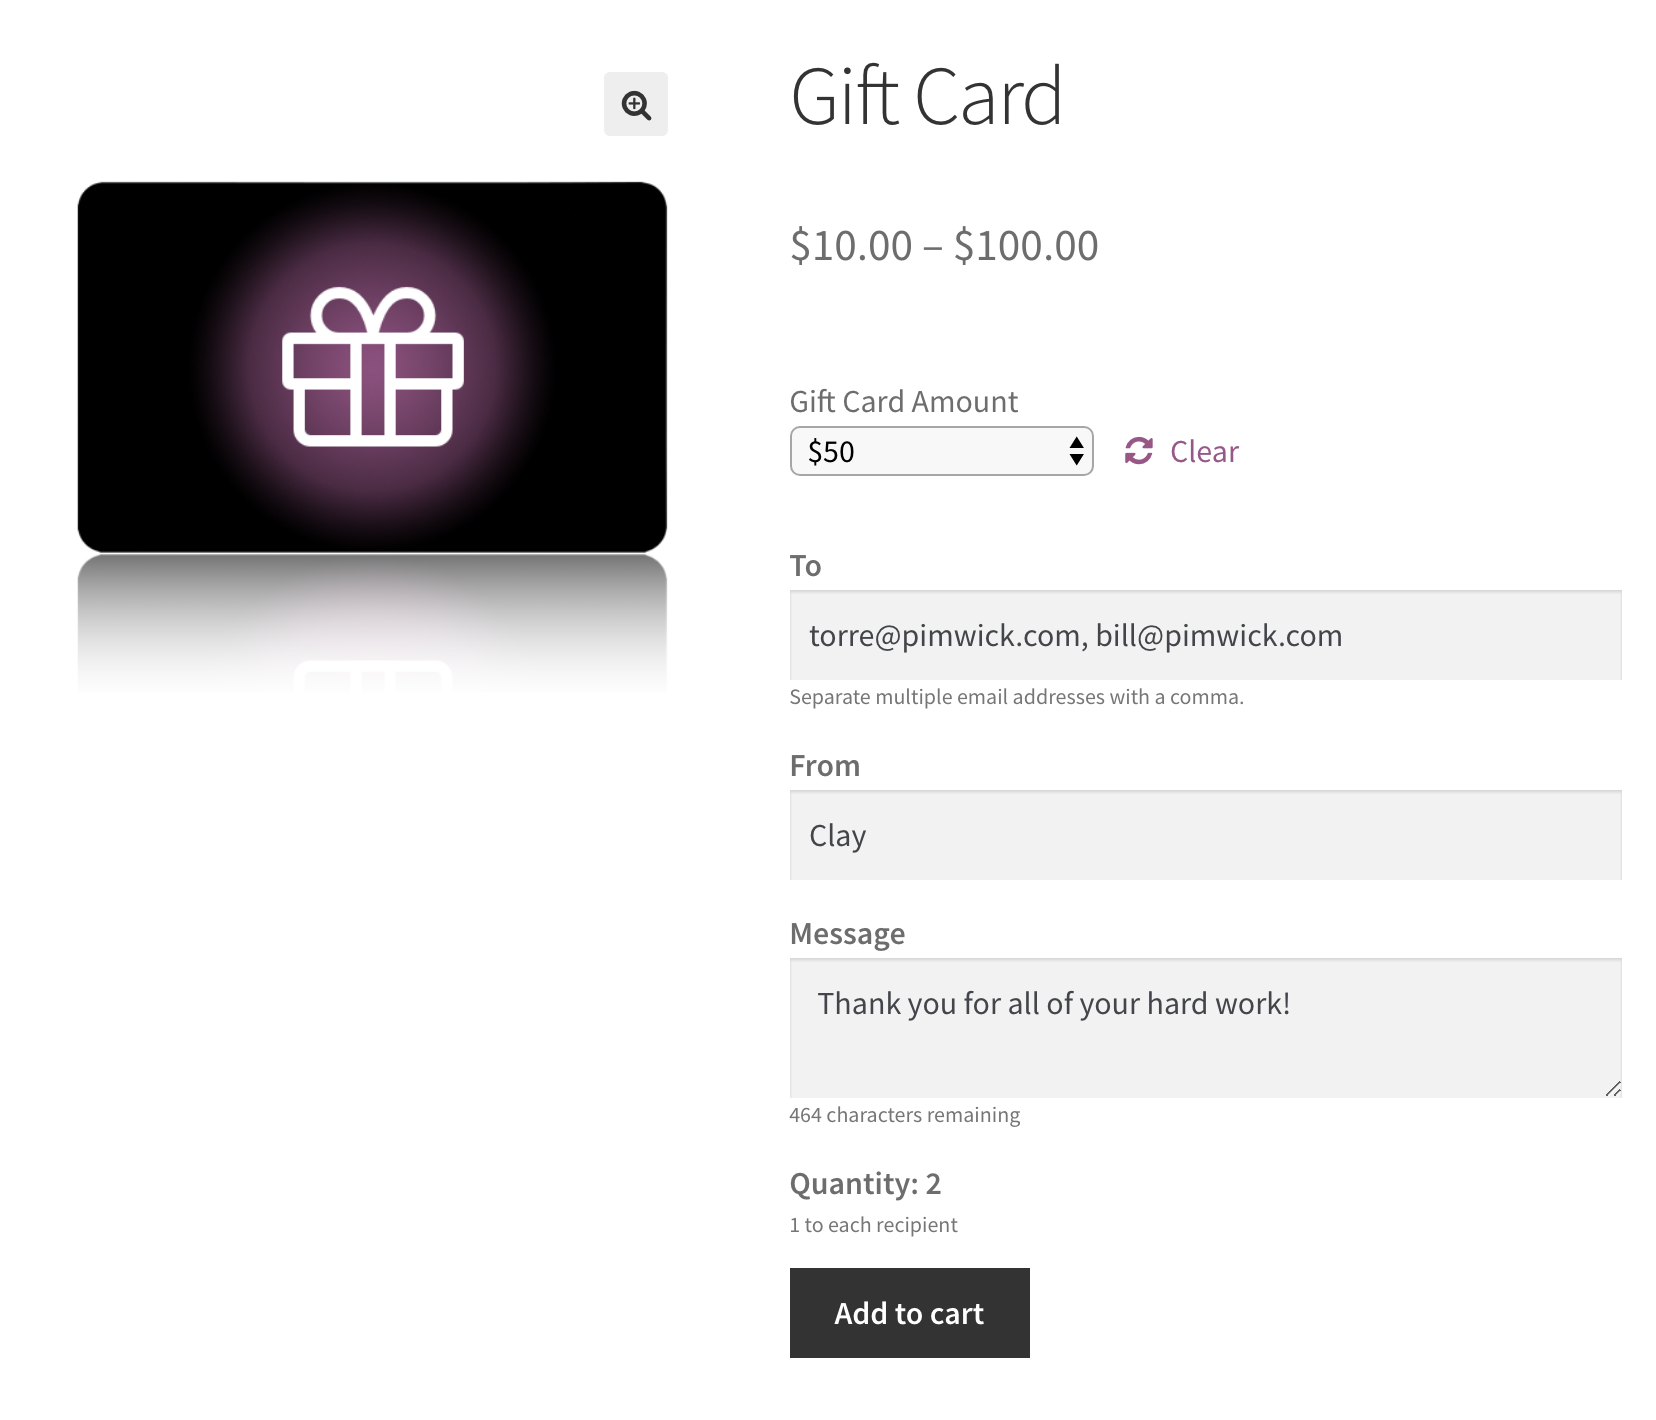 Similar to Amazon.com gift cards, the customer can specify the amount, recipient, and message when purchasing.